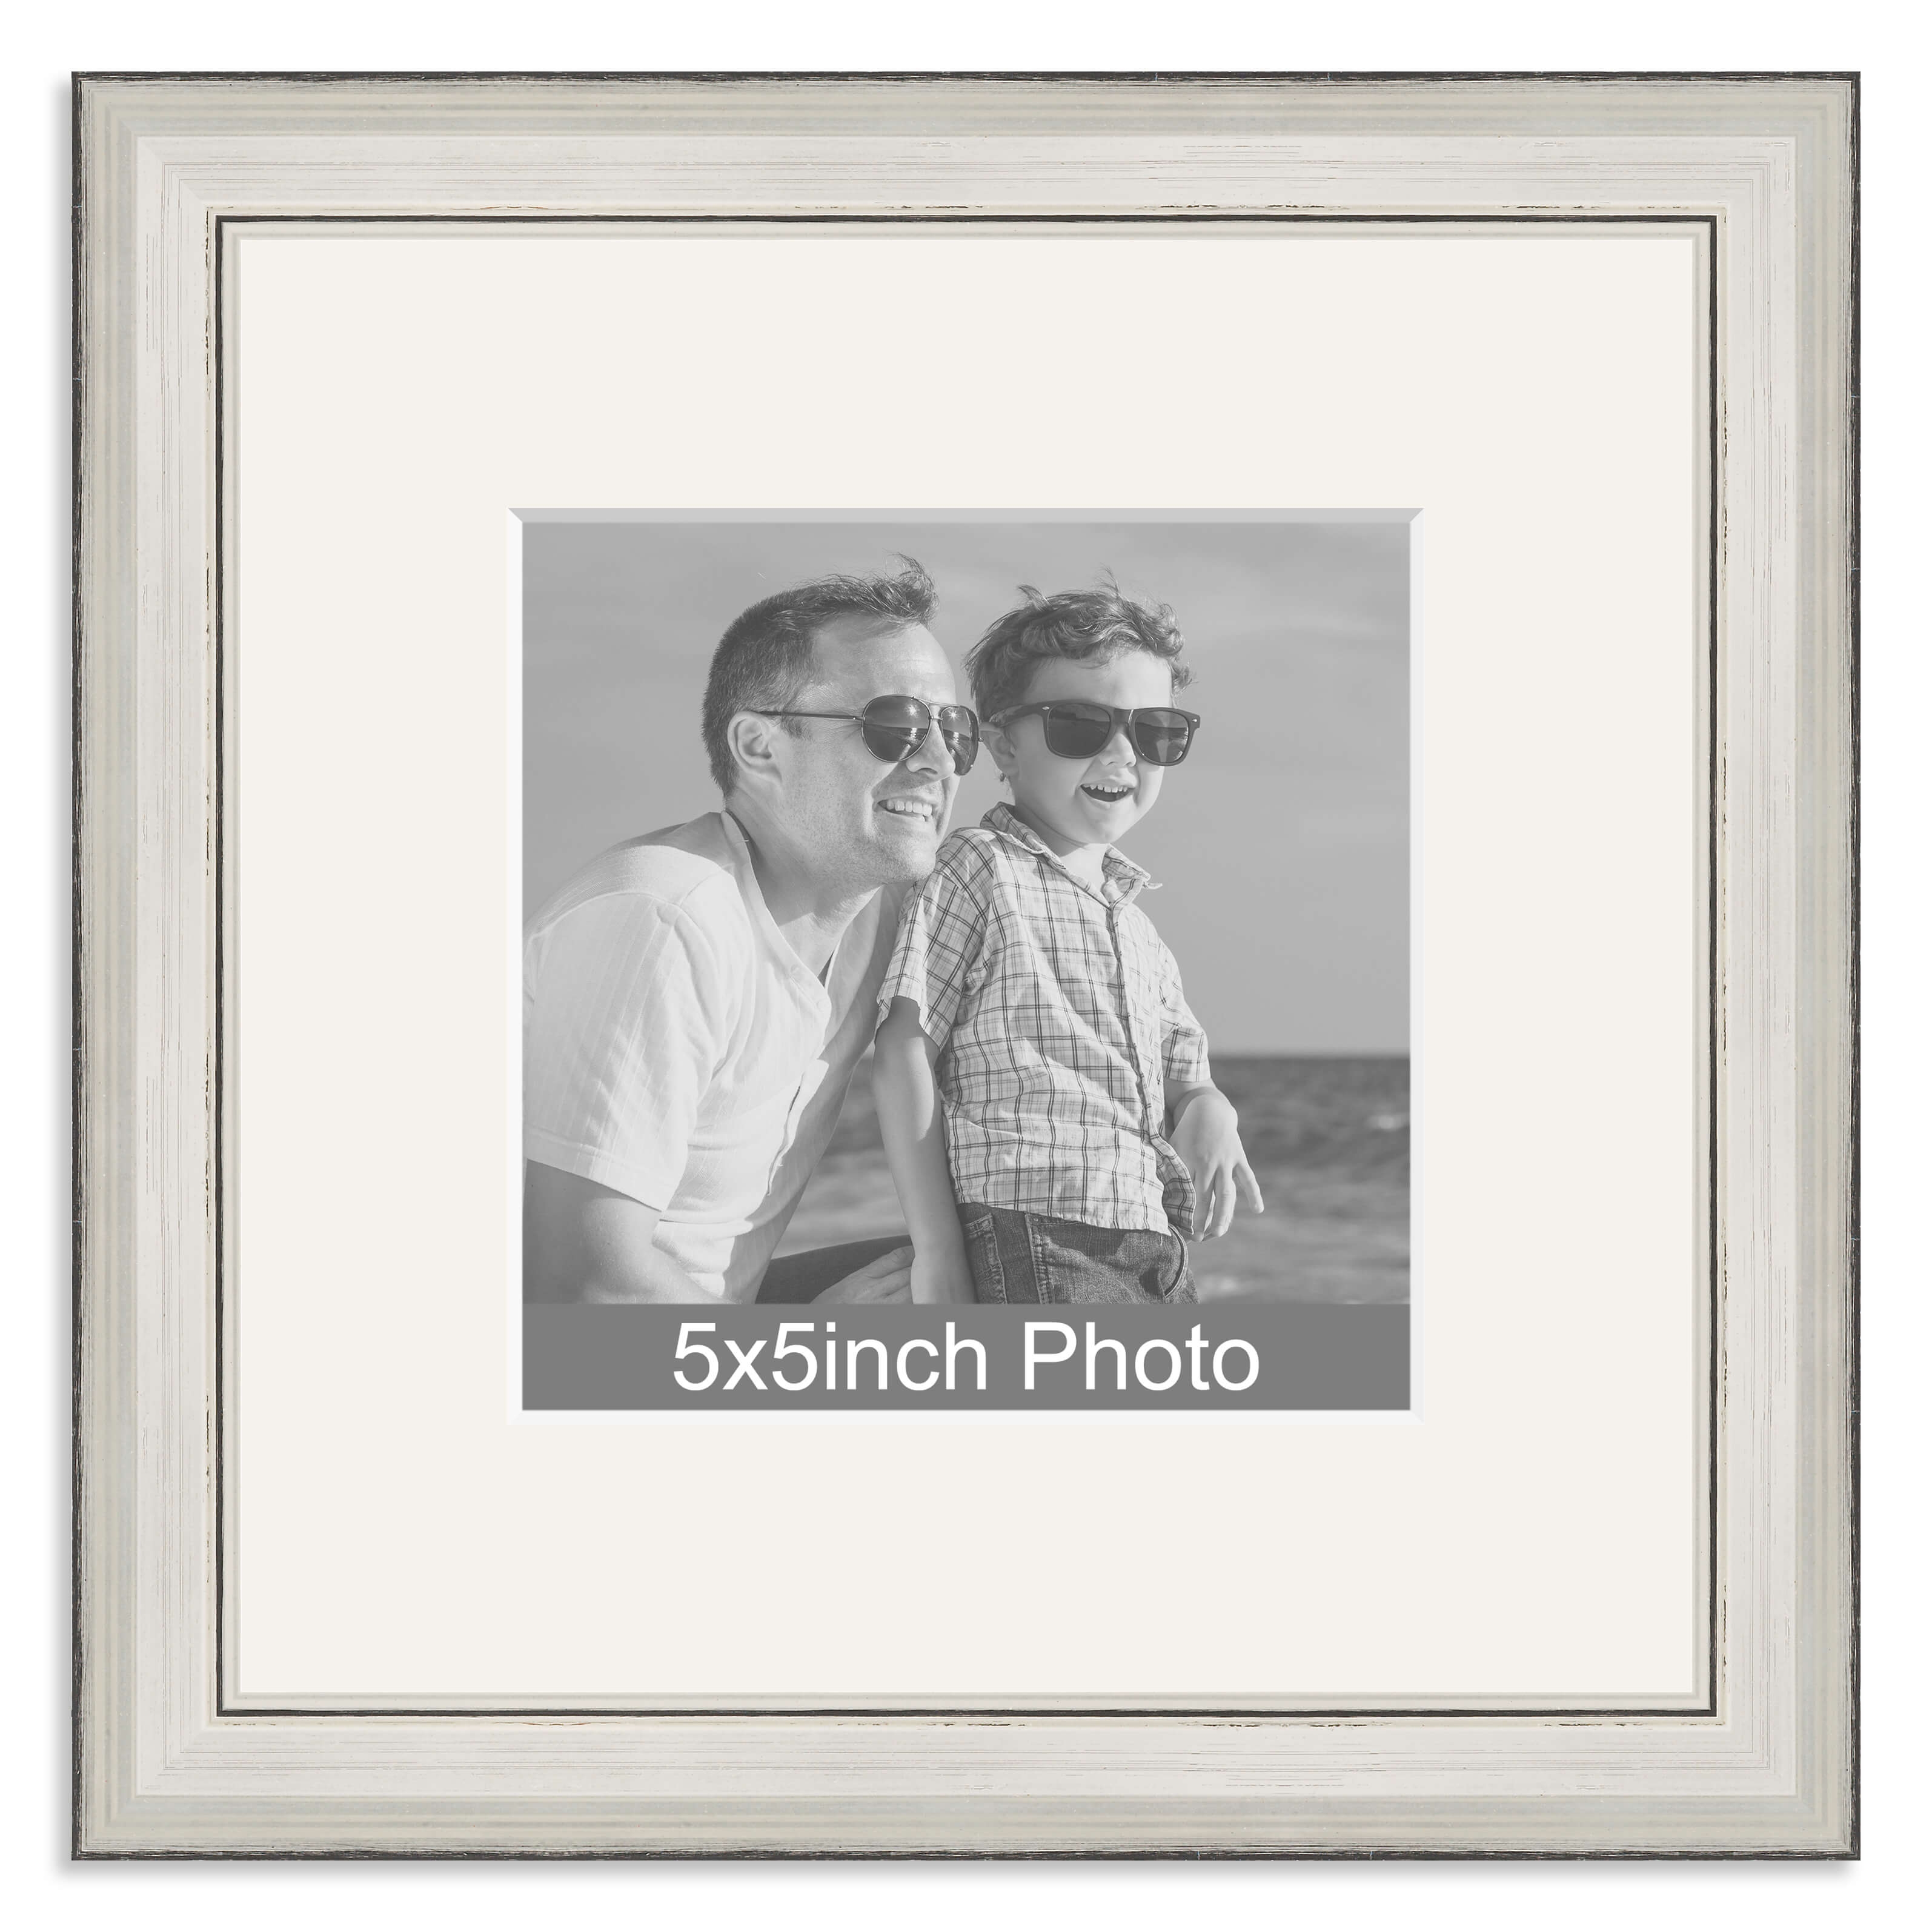 Silver Wooden Photo Frame with mount for a 5x5in Photo – No Photo required